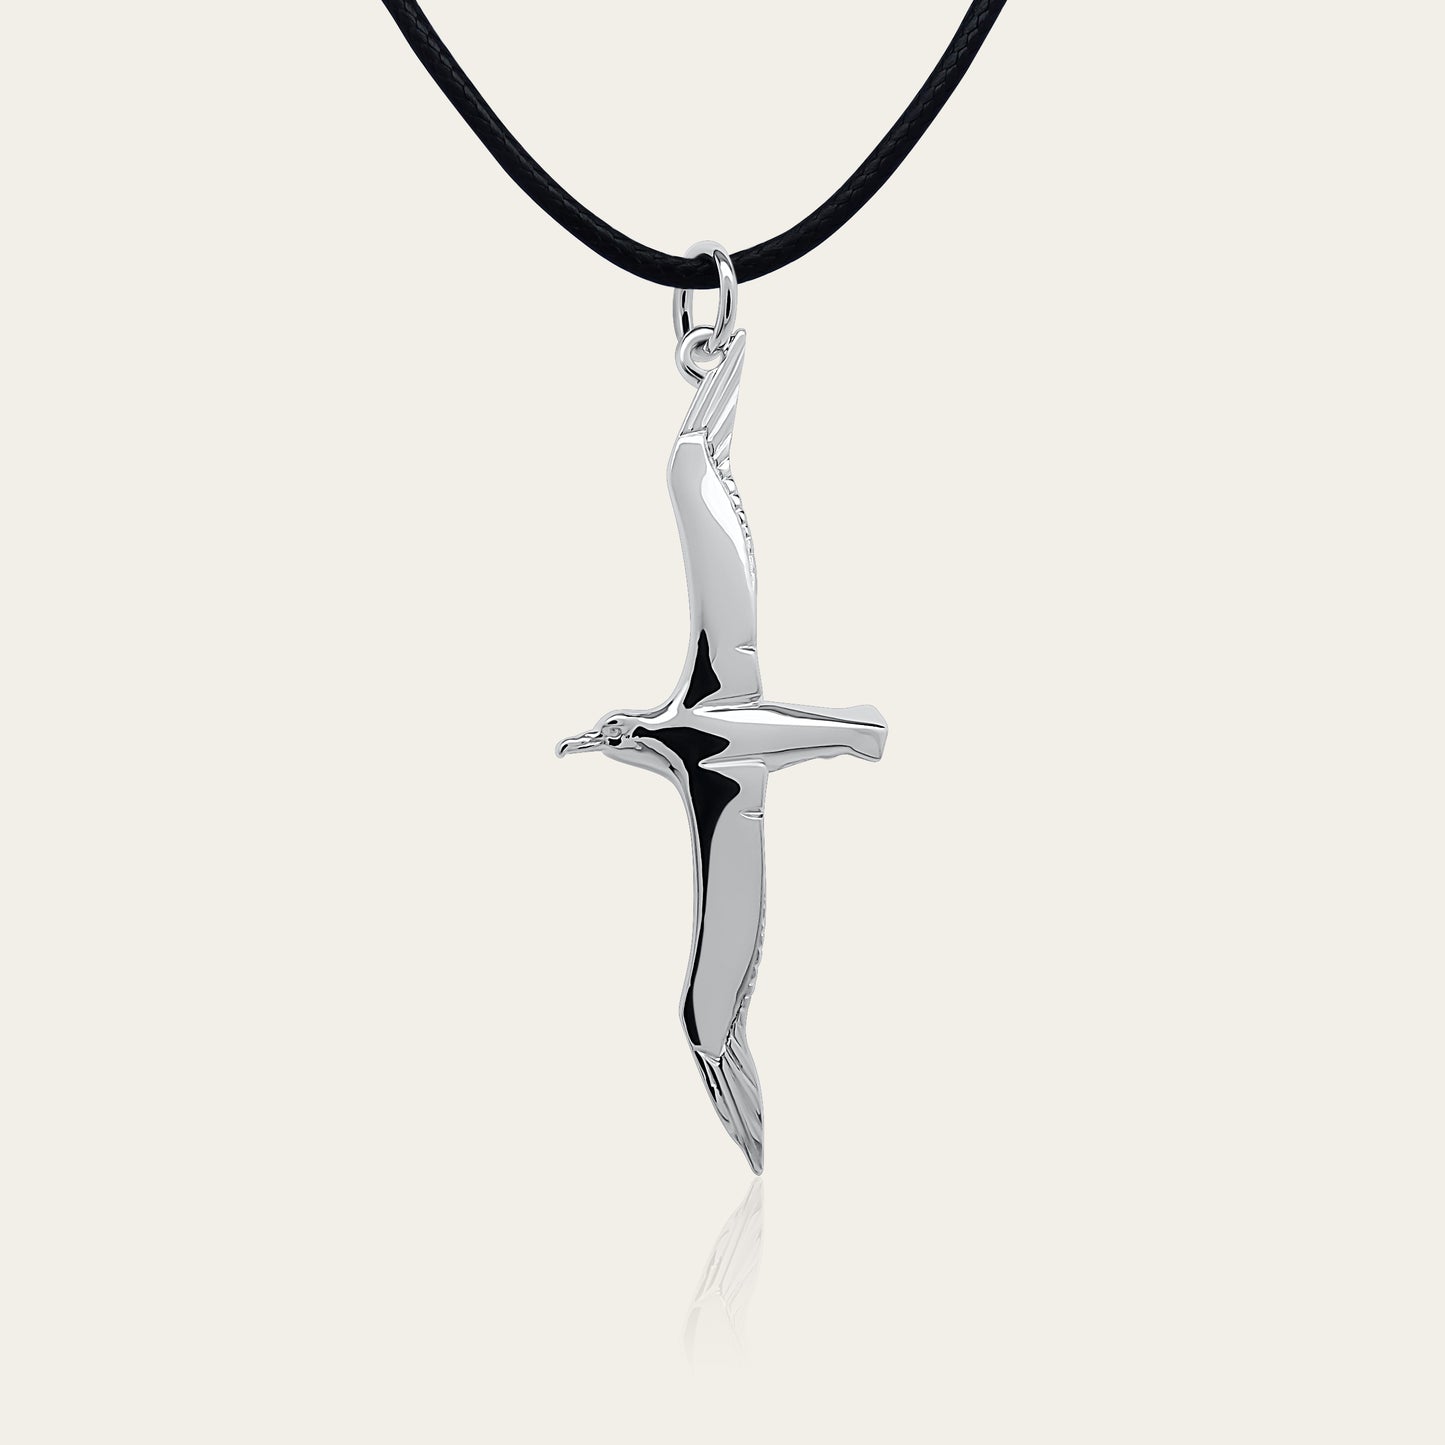 Albatross necklace. Made from highly polished, tarnish resistant silver, strung on a strong cord. © Adrian Ashley